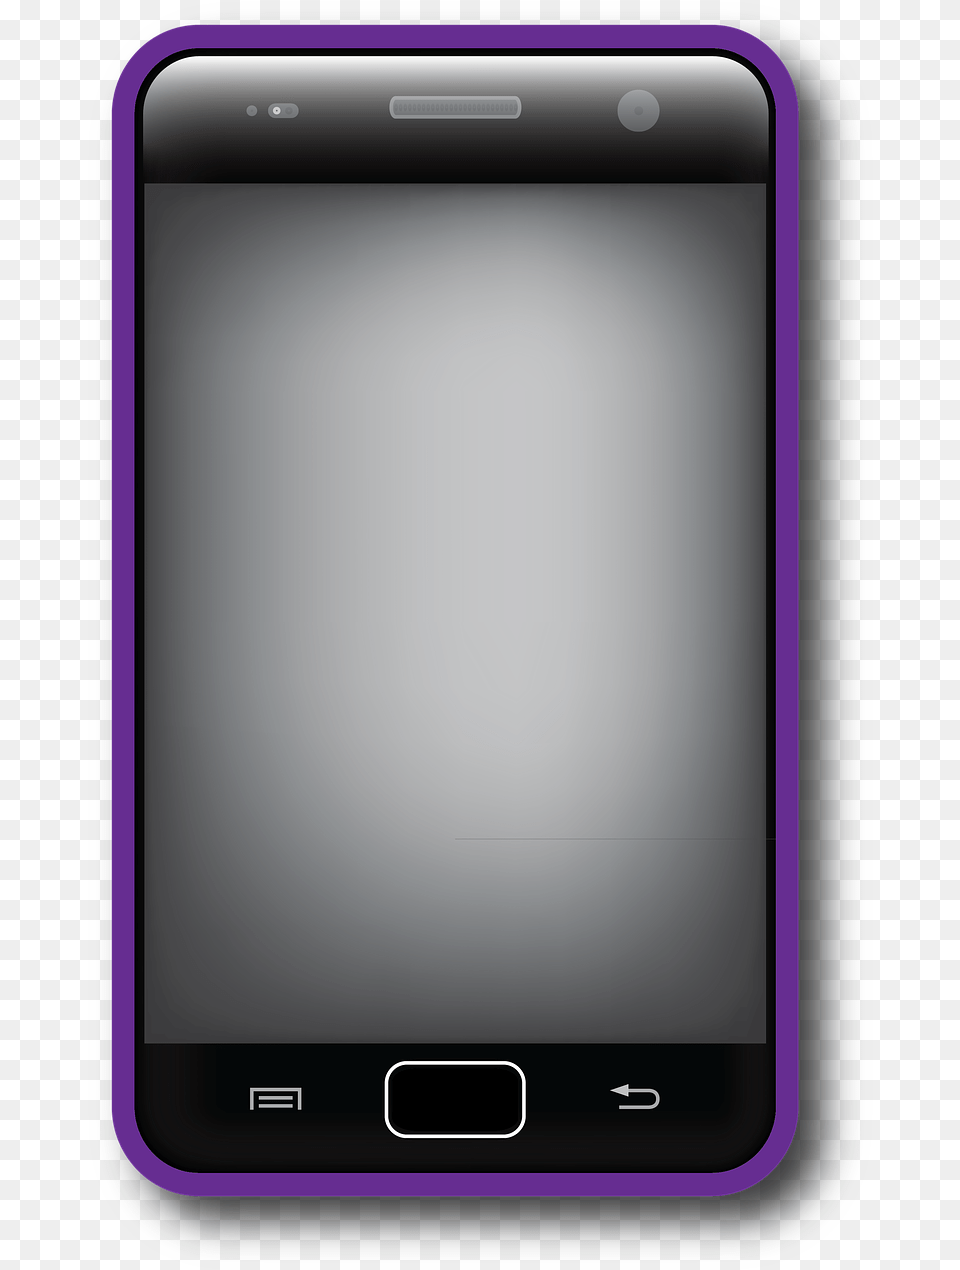 Smartphone, Electronics, Mobile Phone, Phone Png Image